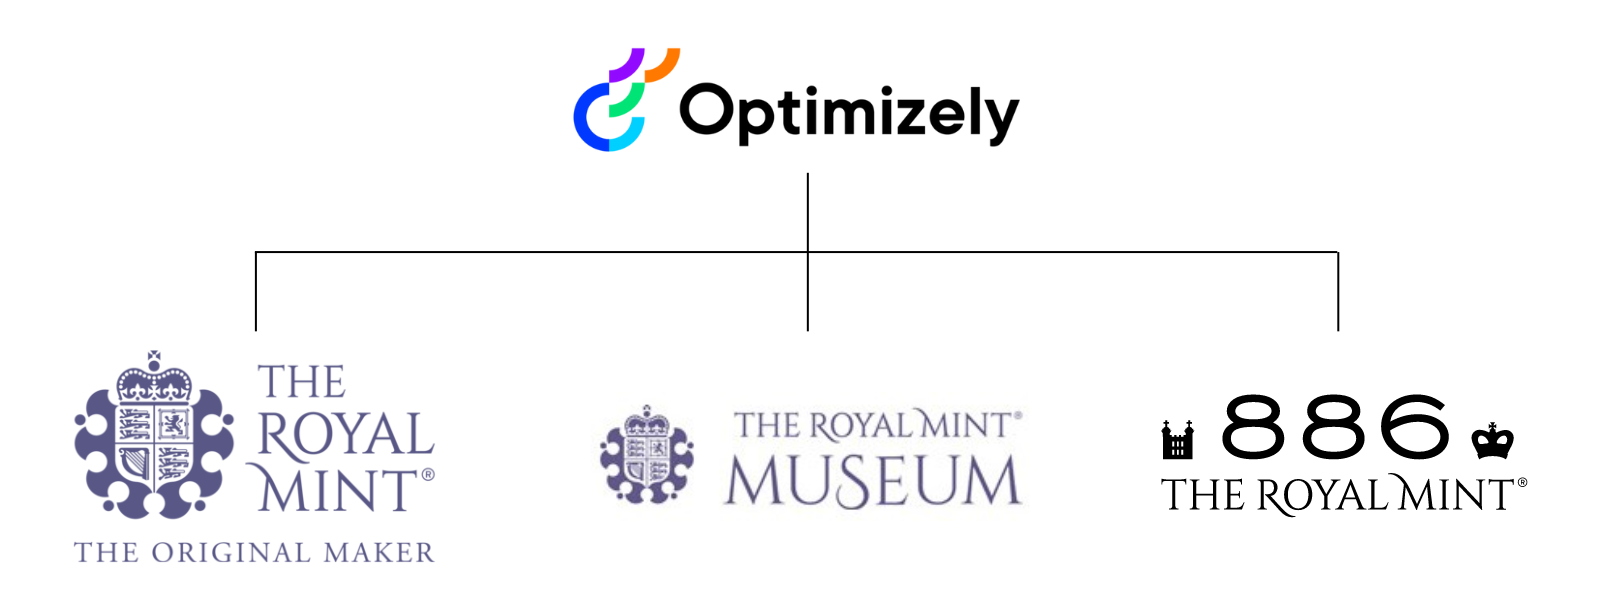 The Royal Mint - Optimizely